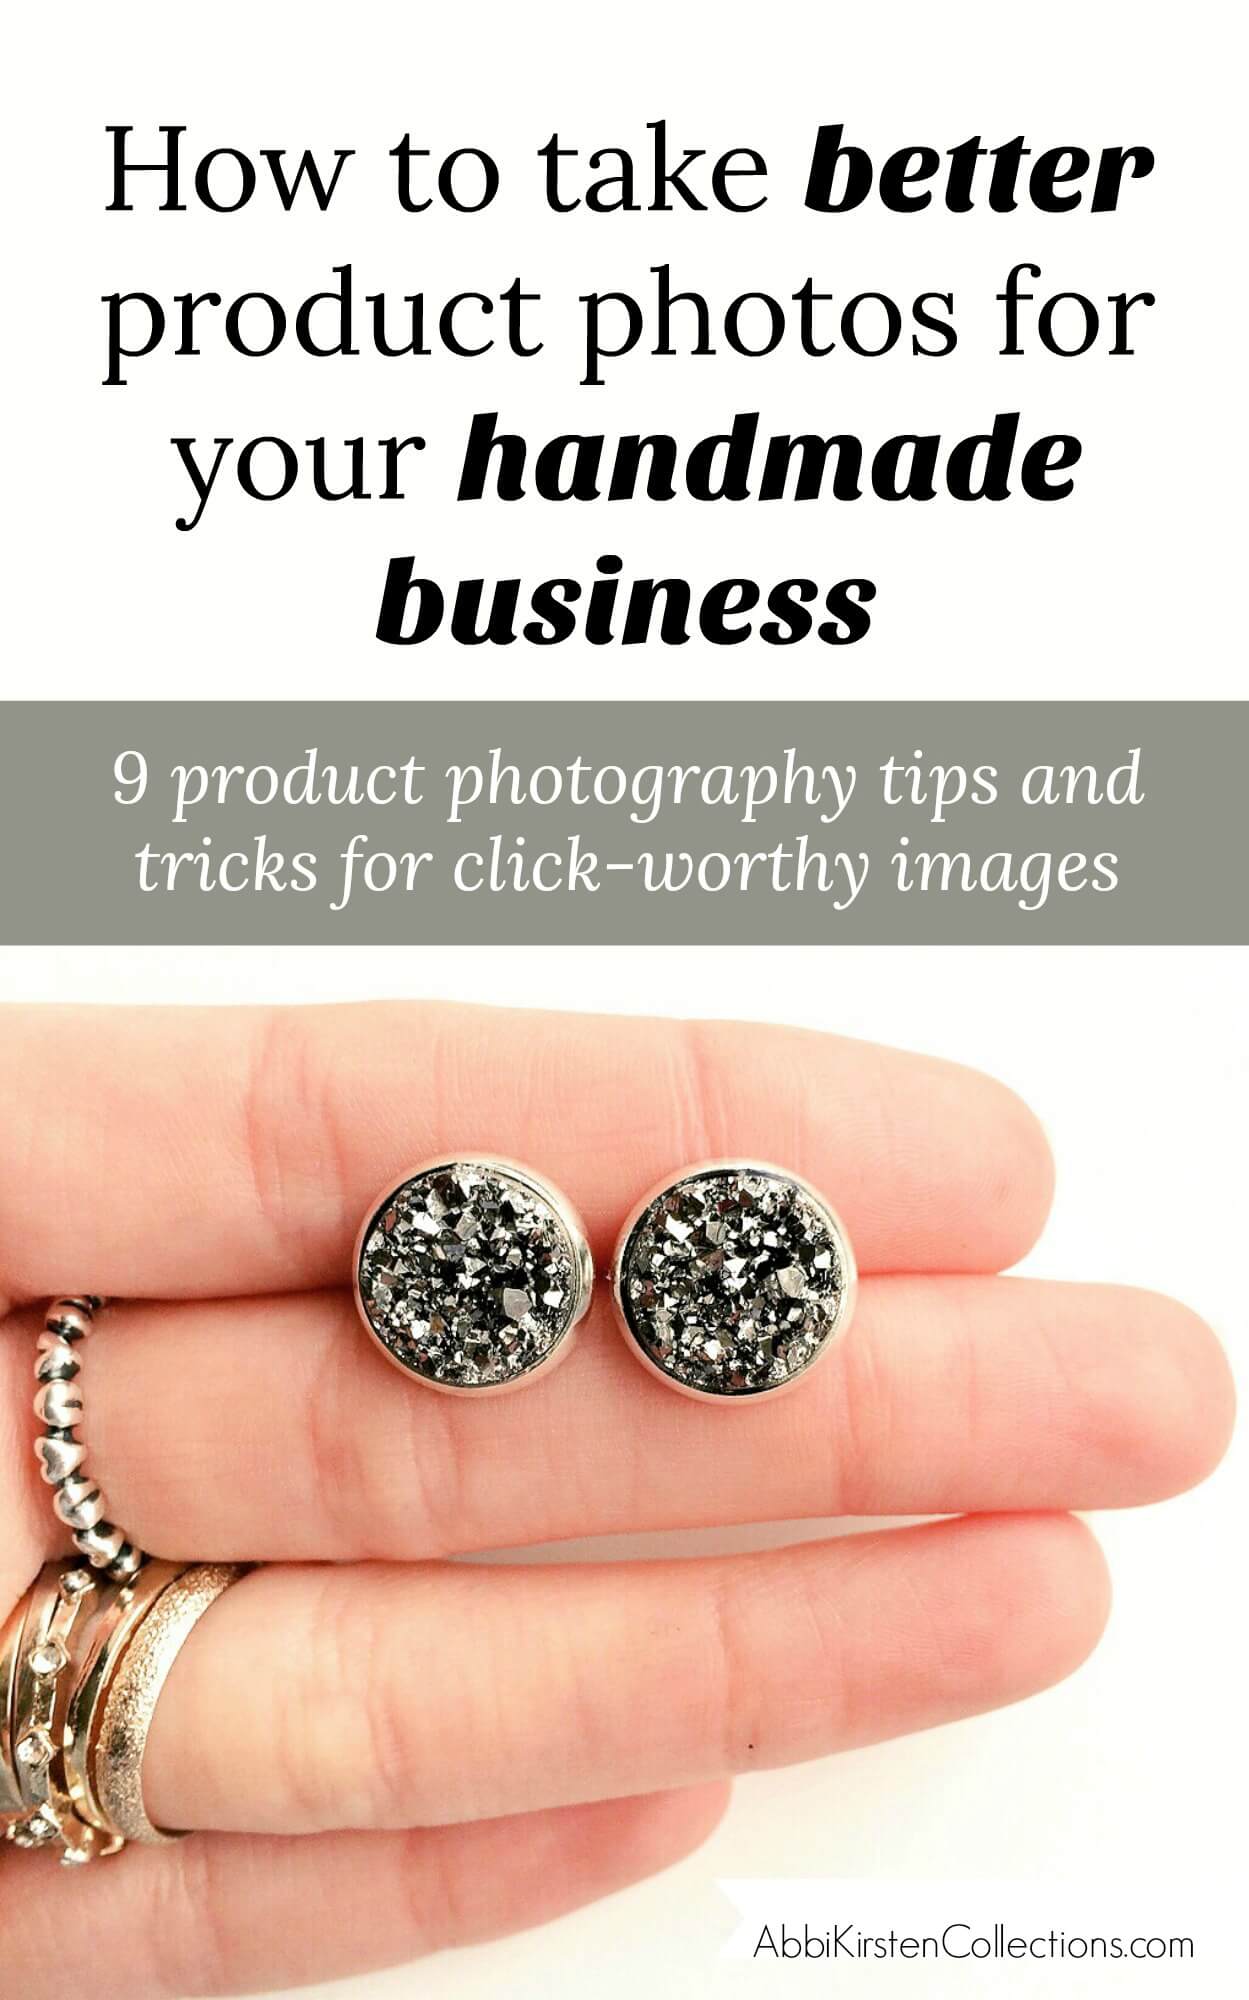 A woman's hand holds a pair of small round black crystal earrings between her index and middle fingers. Text across the top of the image says "How to take better product photos for your handmade business: 9 product photography tips and tricks for click-worthy images"